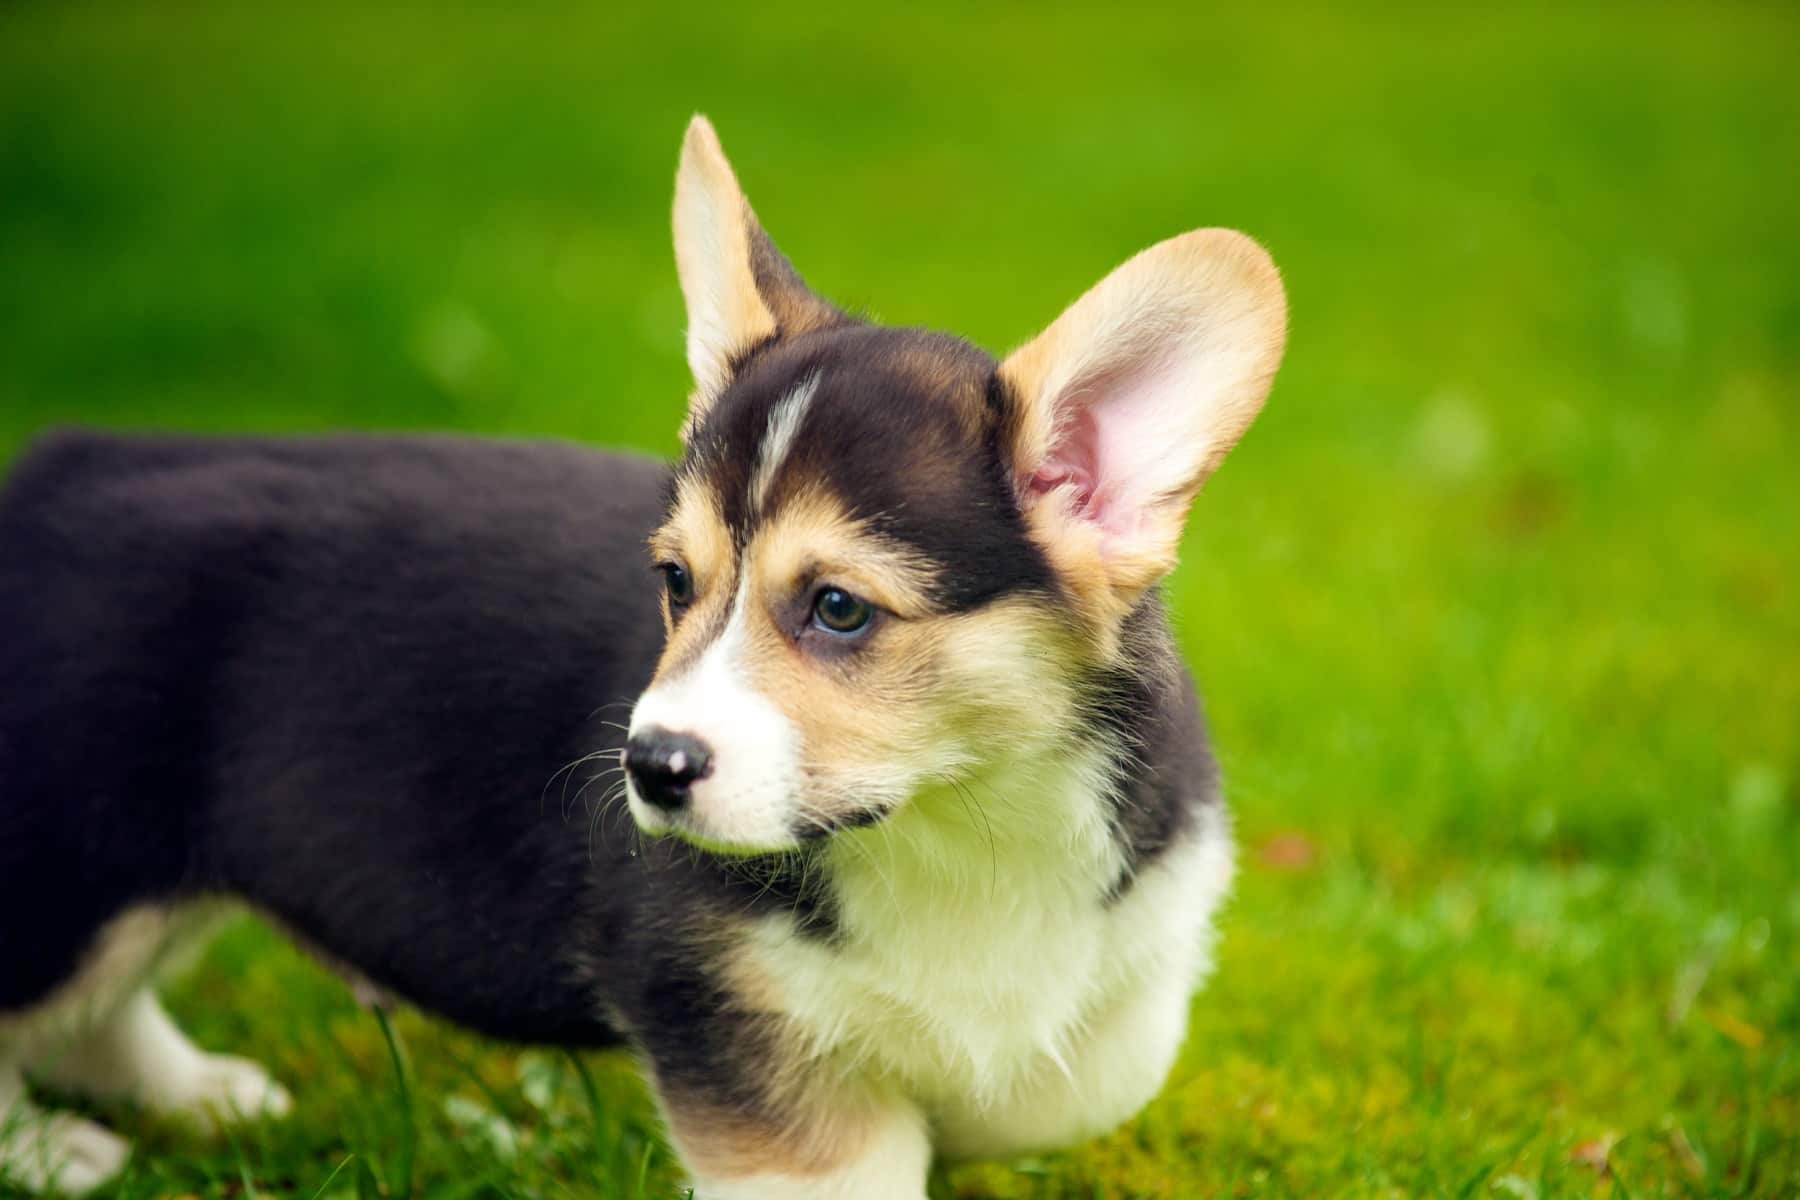 A corgi standing in the grass looking downward toward a treat.